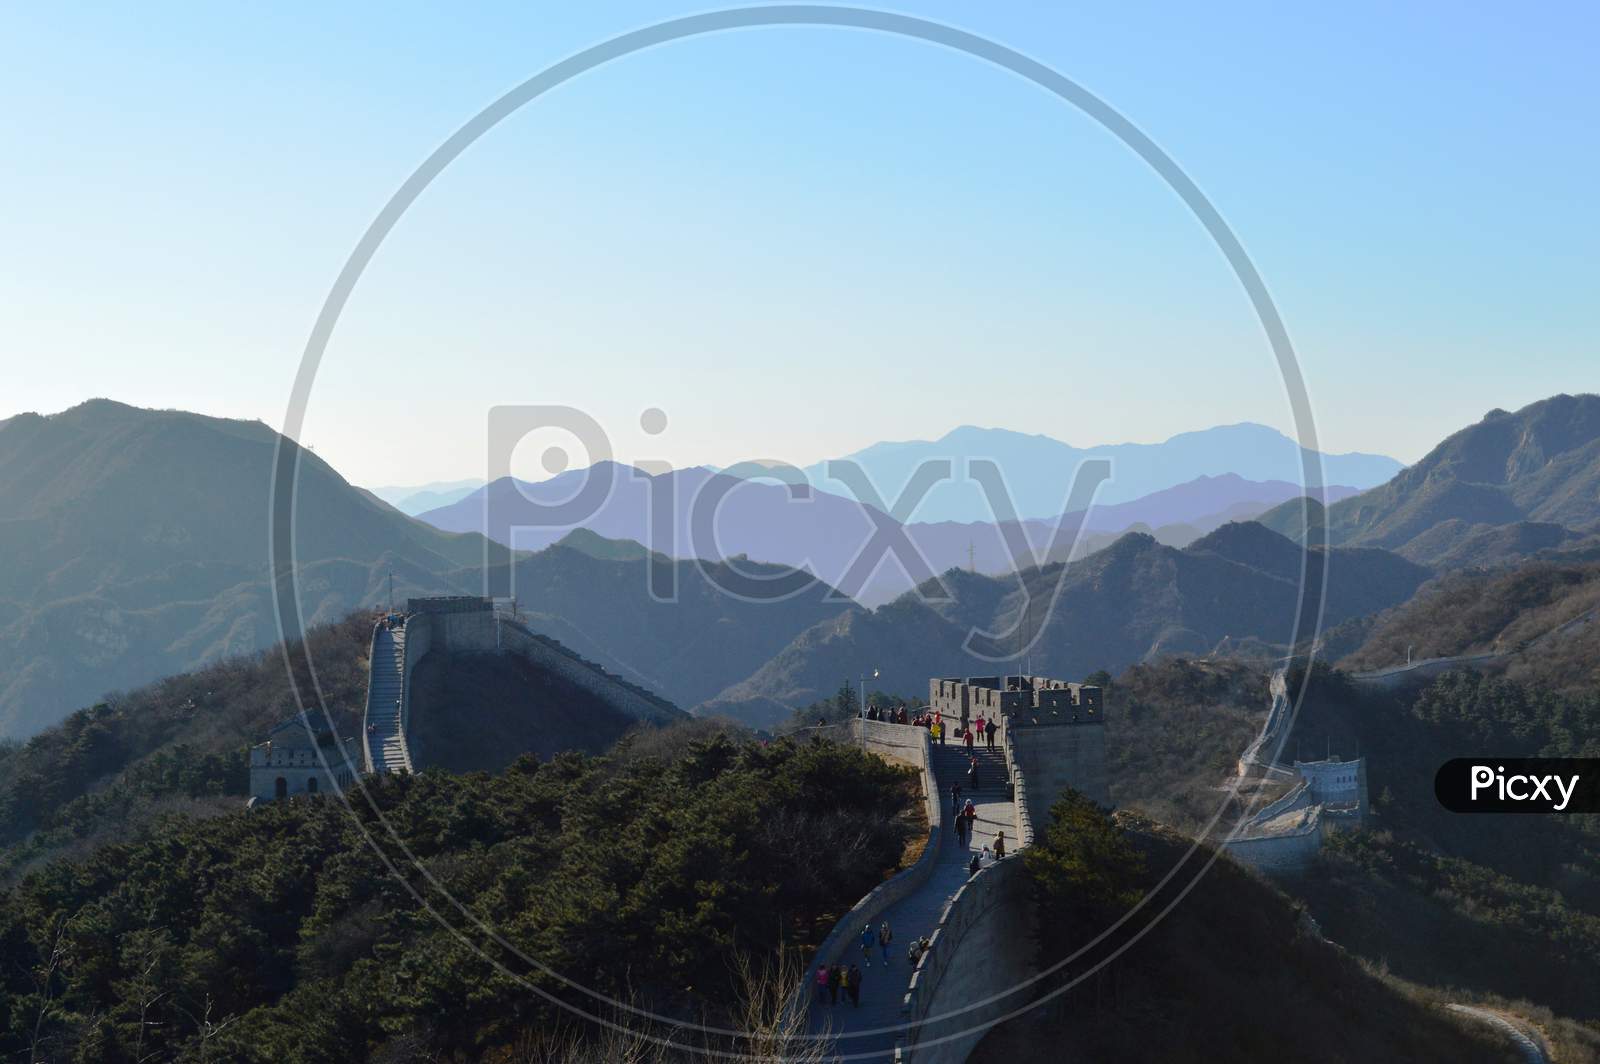 Badaling Section Of The Great Wall Of China Near Beijing